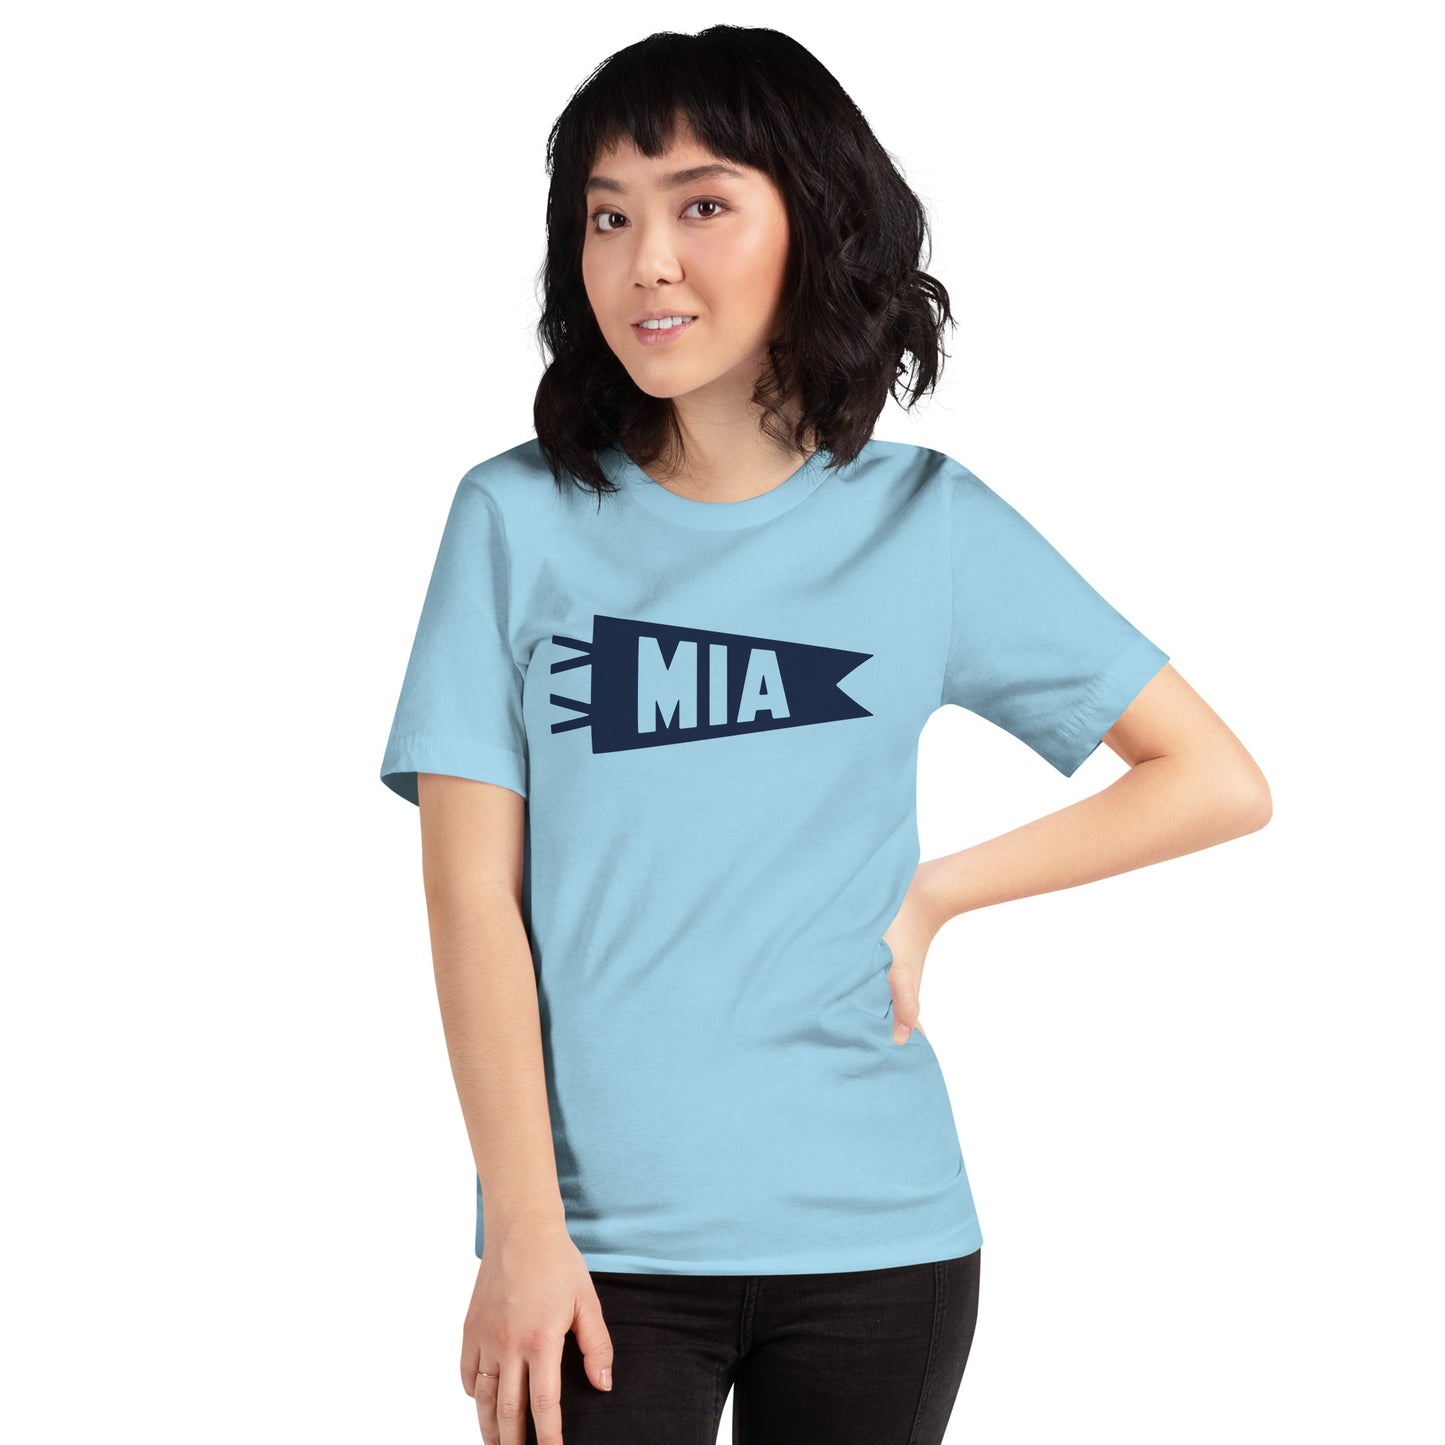 Airport Code T-Shirt - Navy Blue Graphic • MIA Miami • YHM Designs - Image 09